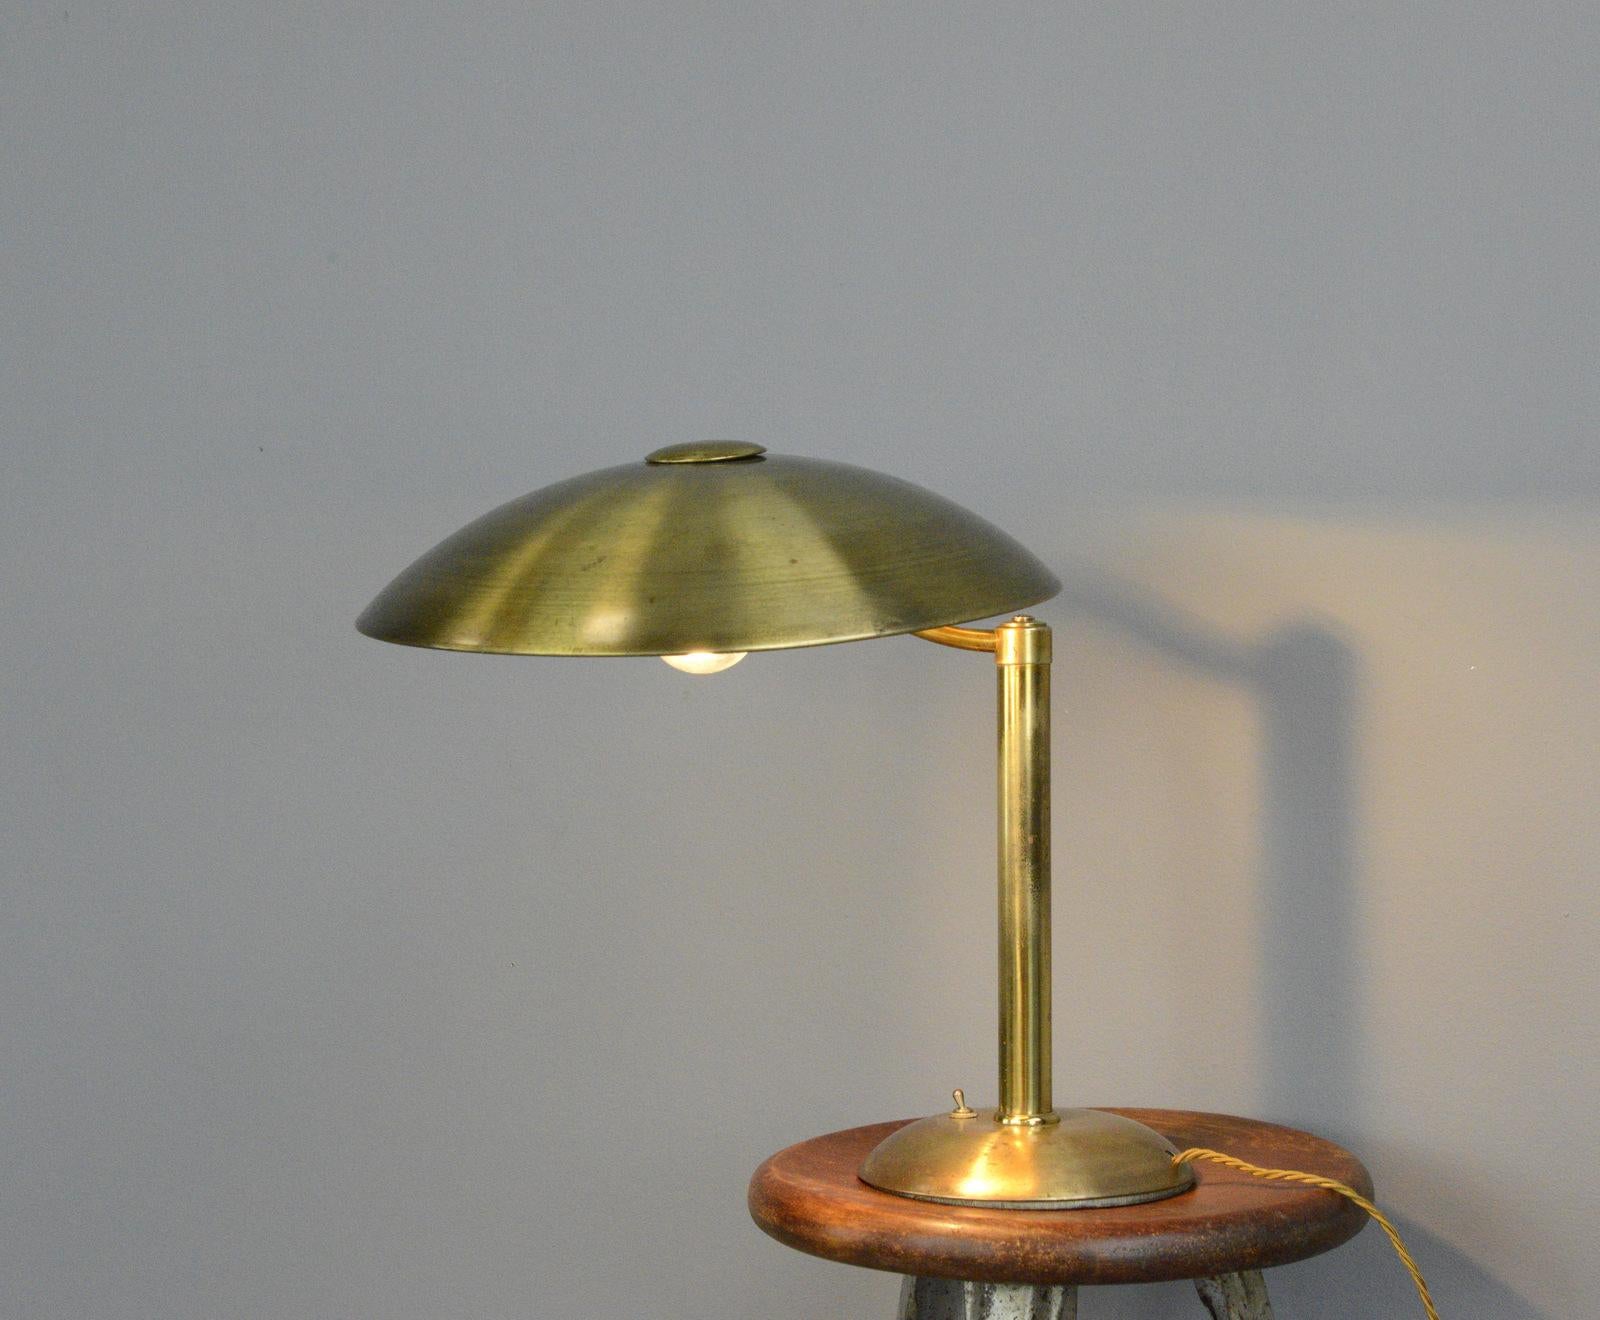 German Swing Arm Brass Table Lamp by Hillebrand circa 1930s